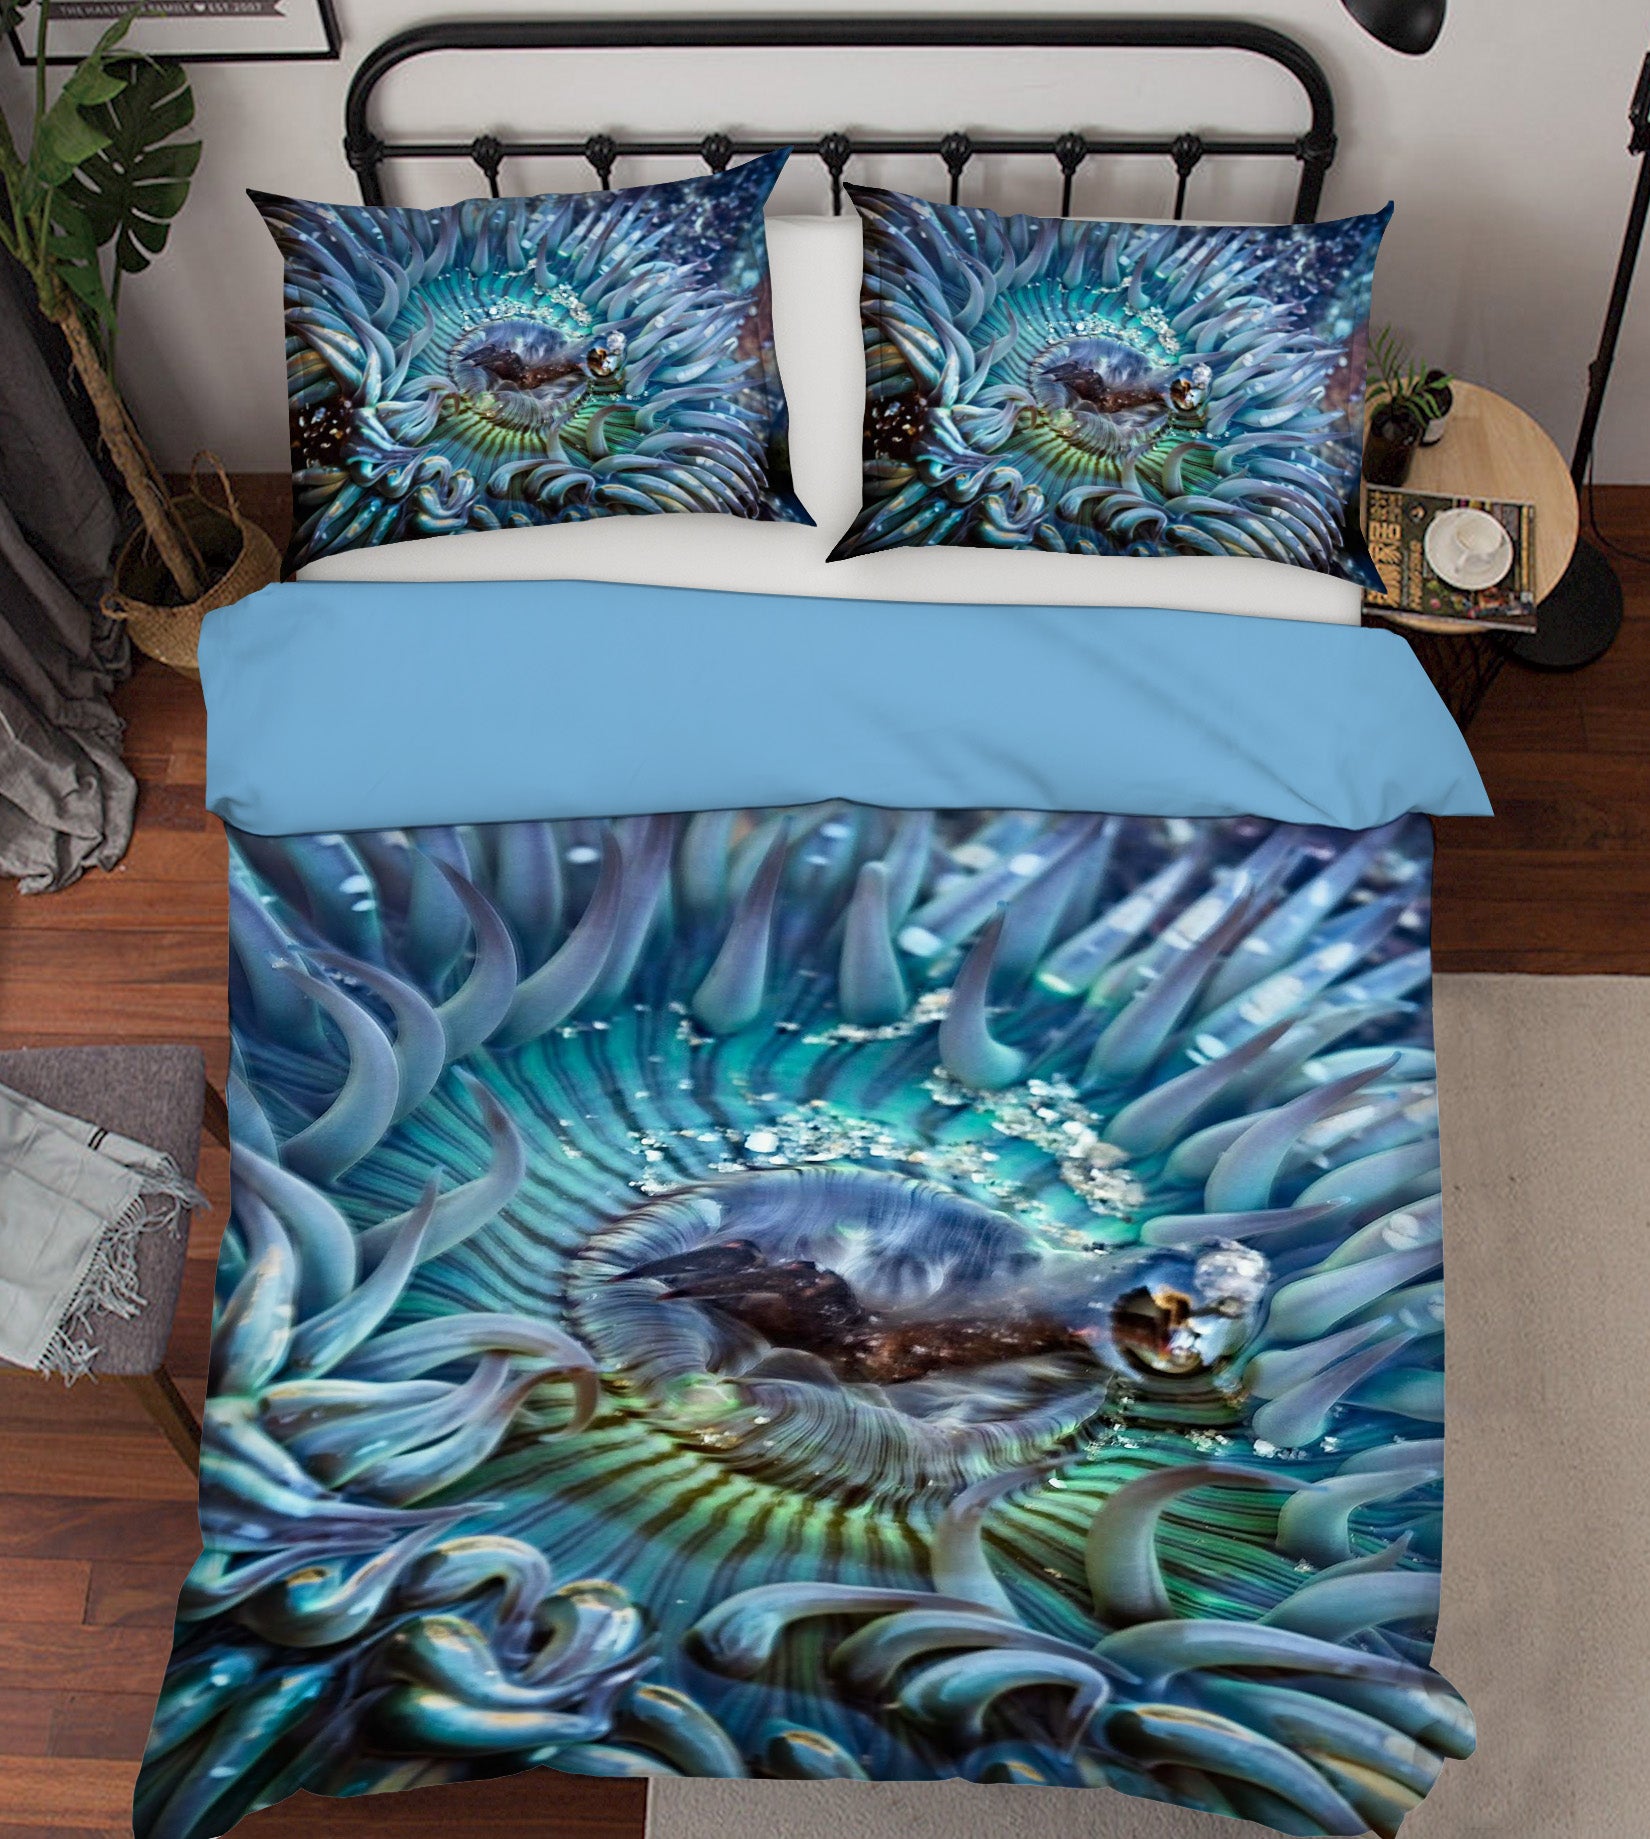 3D Tidepool Treasure 2135 Kathy Barefield Bedding Bed Pillowcases Quilt